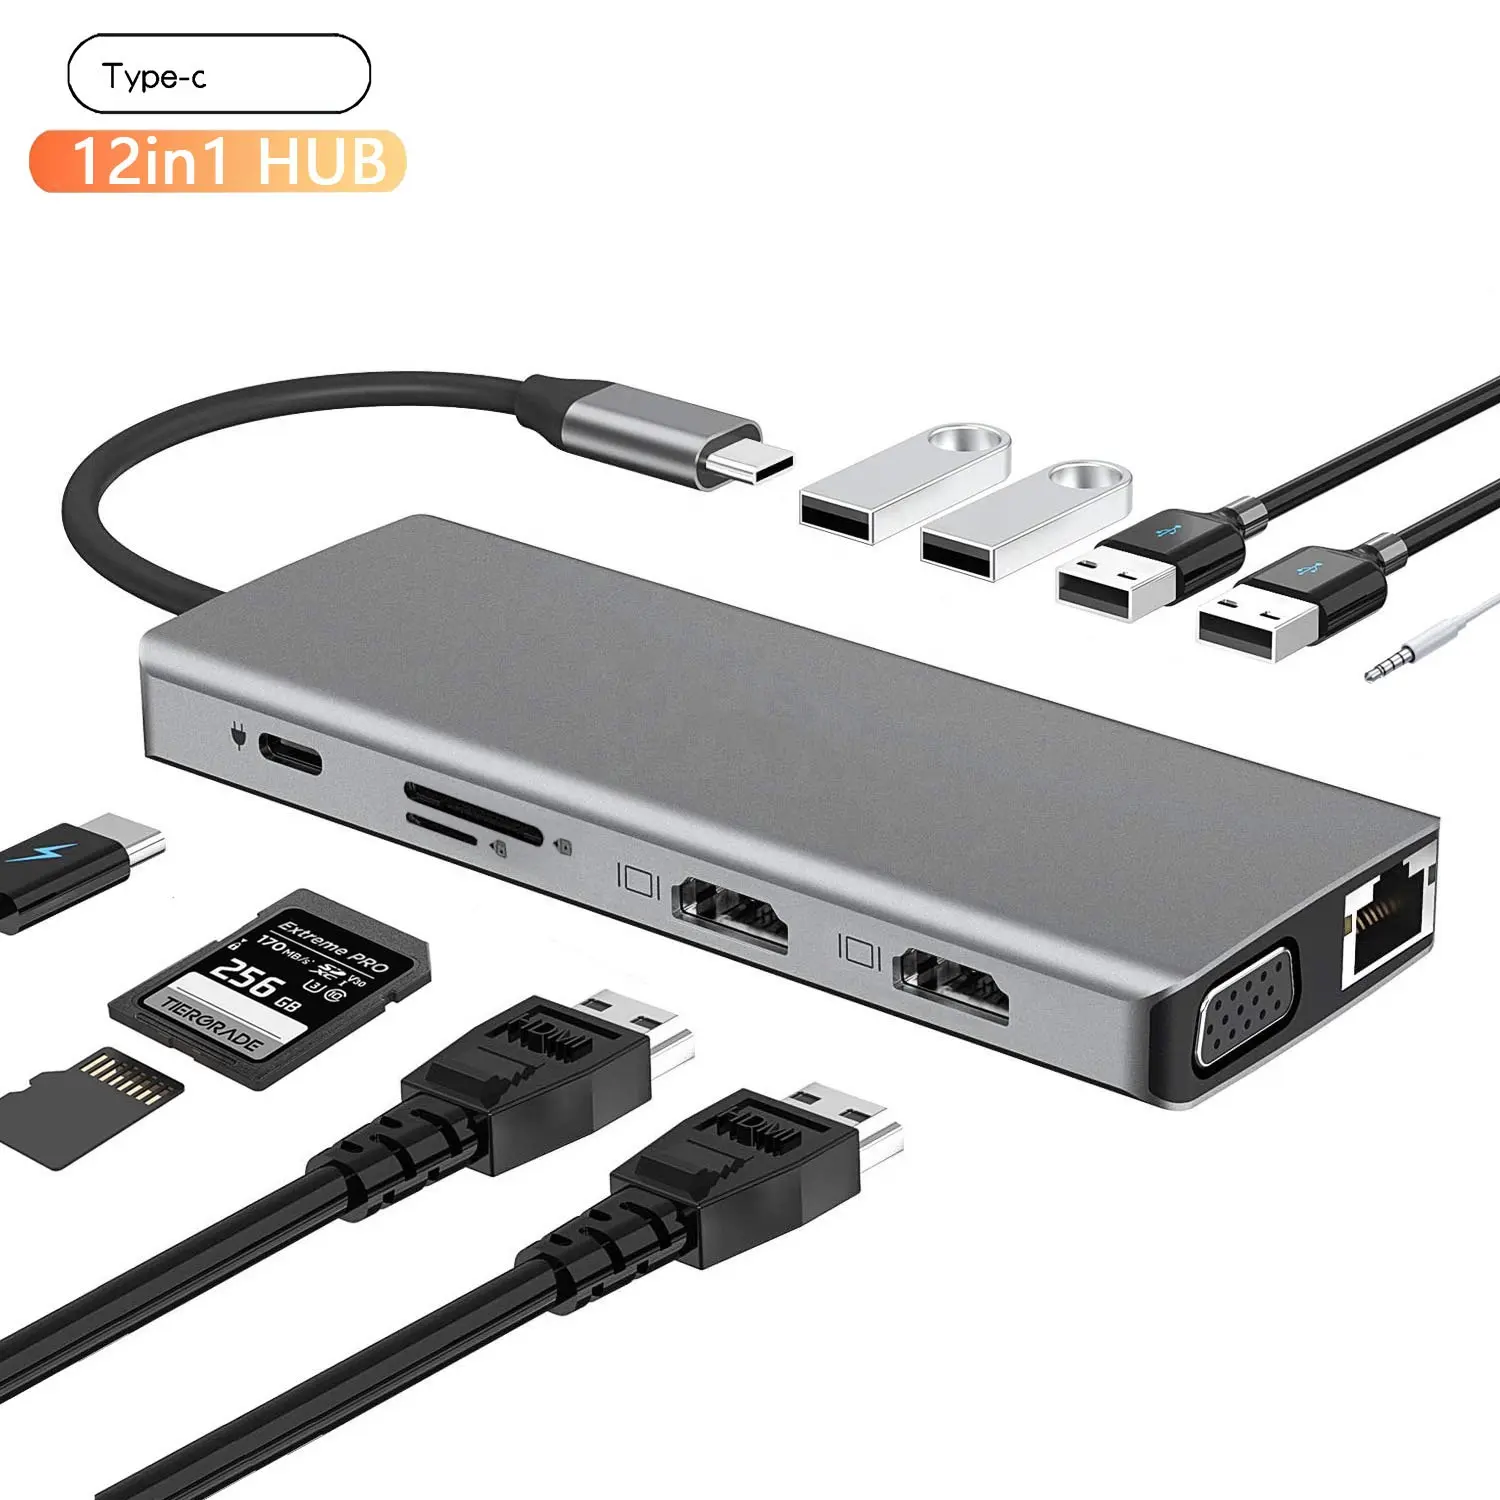 Hot selling 12 in 1 USB C to Dual HDMI Adapter all-in-one type-c USB 3.0 Dual HDMI VGA docking station RJ451000Mbps Gigabit